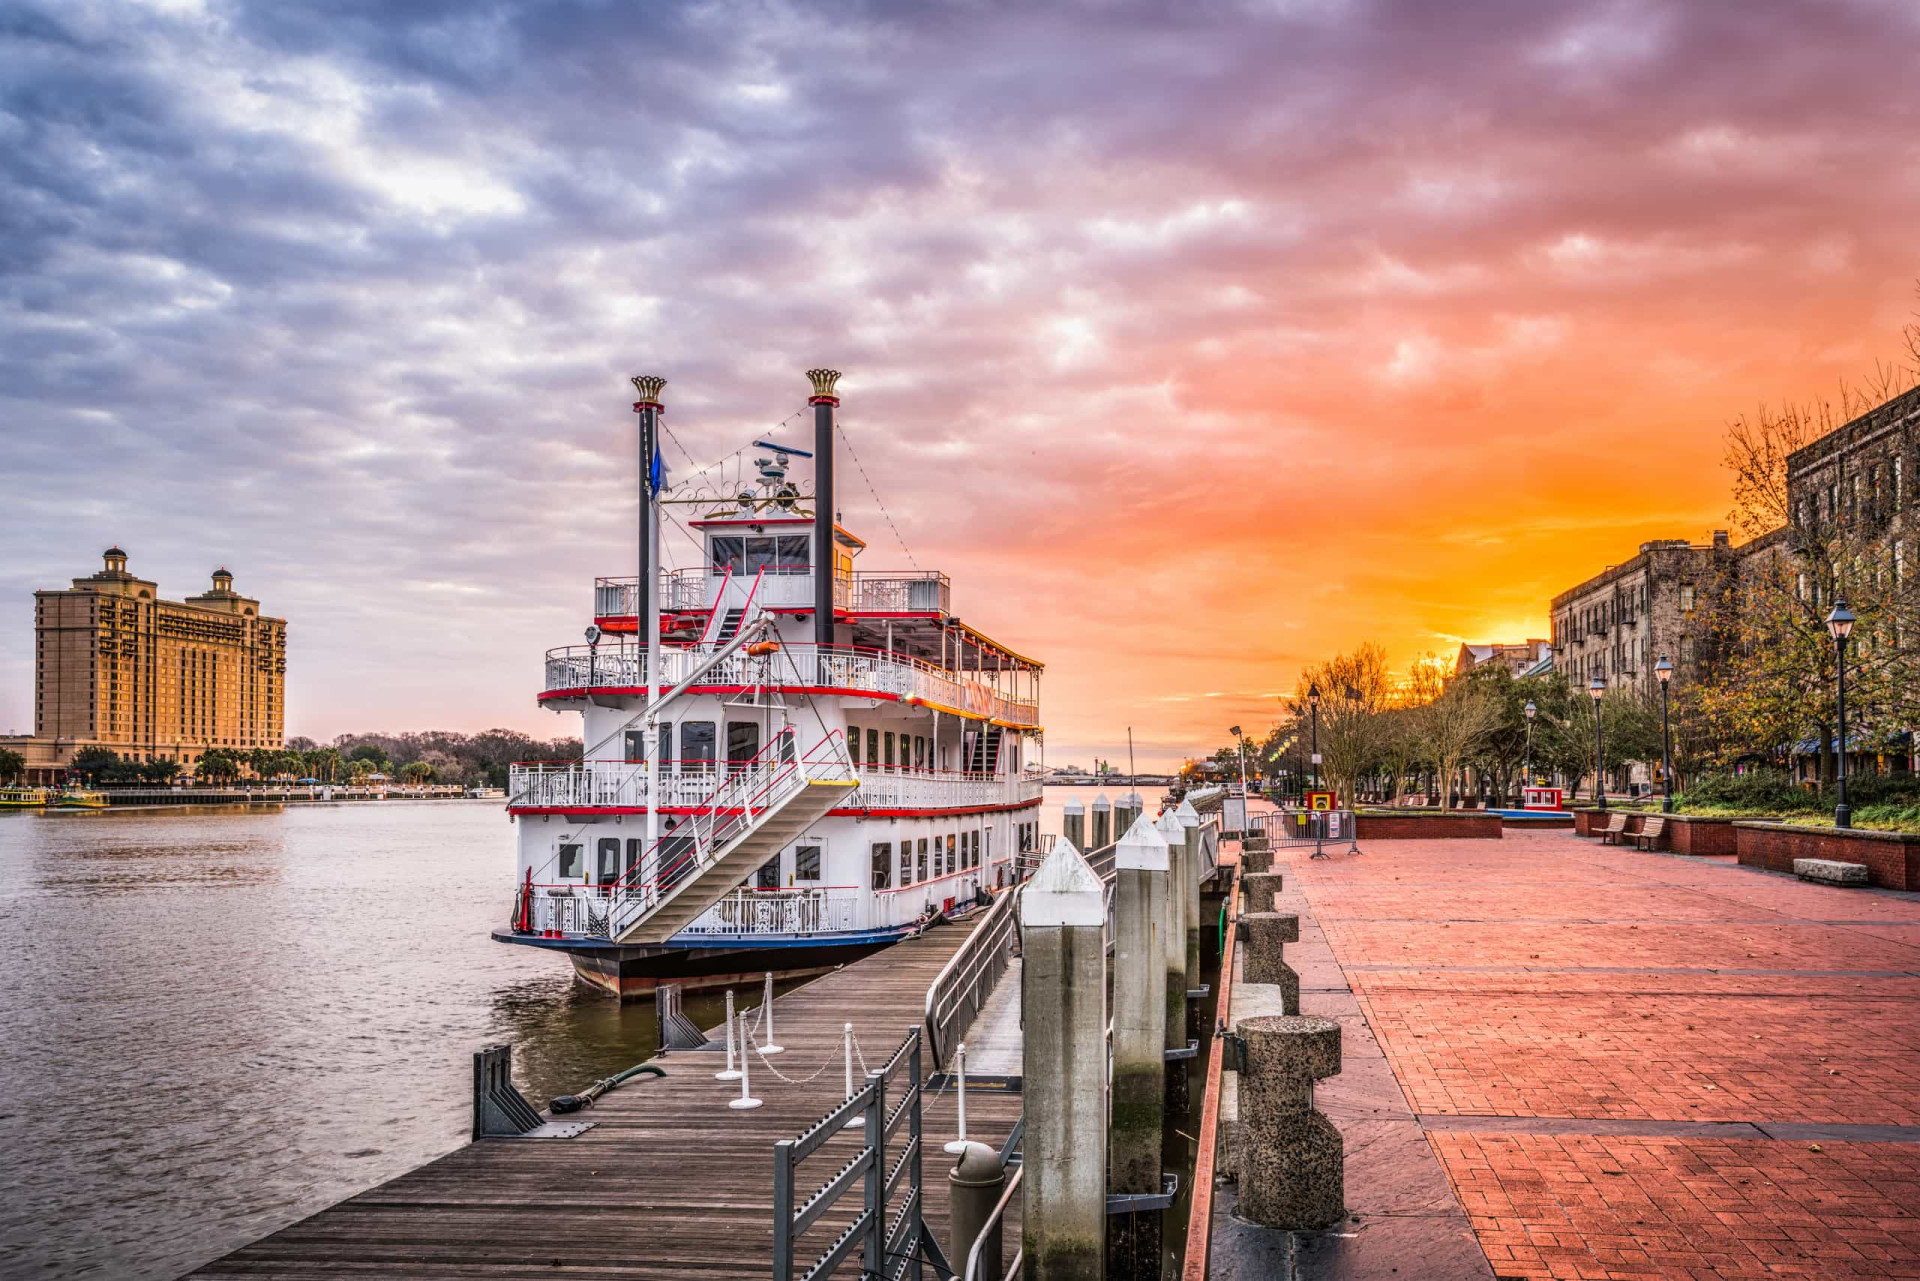 <p>Taking a riverboat cruise along the Savannah is a glorious way to see the sights of the historic center. Boats set sail from River Street throughout the day and night, including options for sunset dinners and drinks.</p><p><a href="https://www.msn.com/en-us/community/channel/vid-7xx8mnucu55yw63we9va2gwr7uihbxwc68fxqp25x6tg4ftibpra?cvid=94631541bc0f4f89bfd59158d696ad7e">Follow us and access great exclusive content every day</a></p>